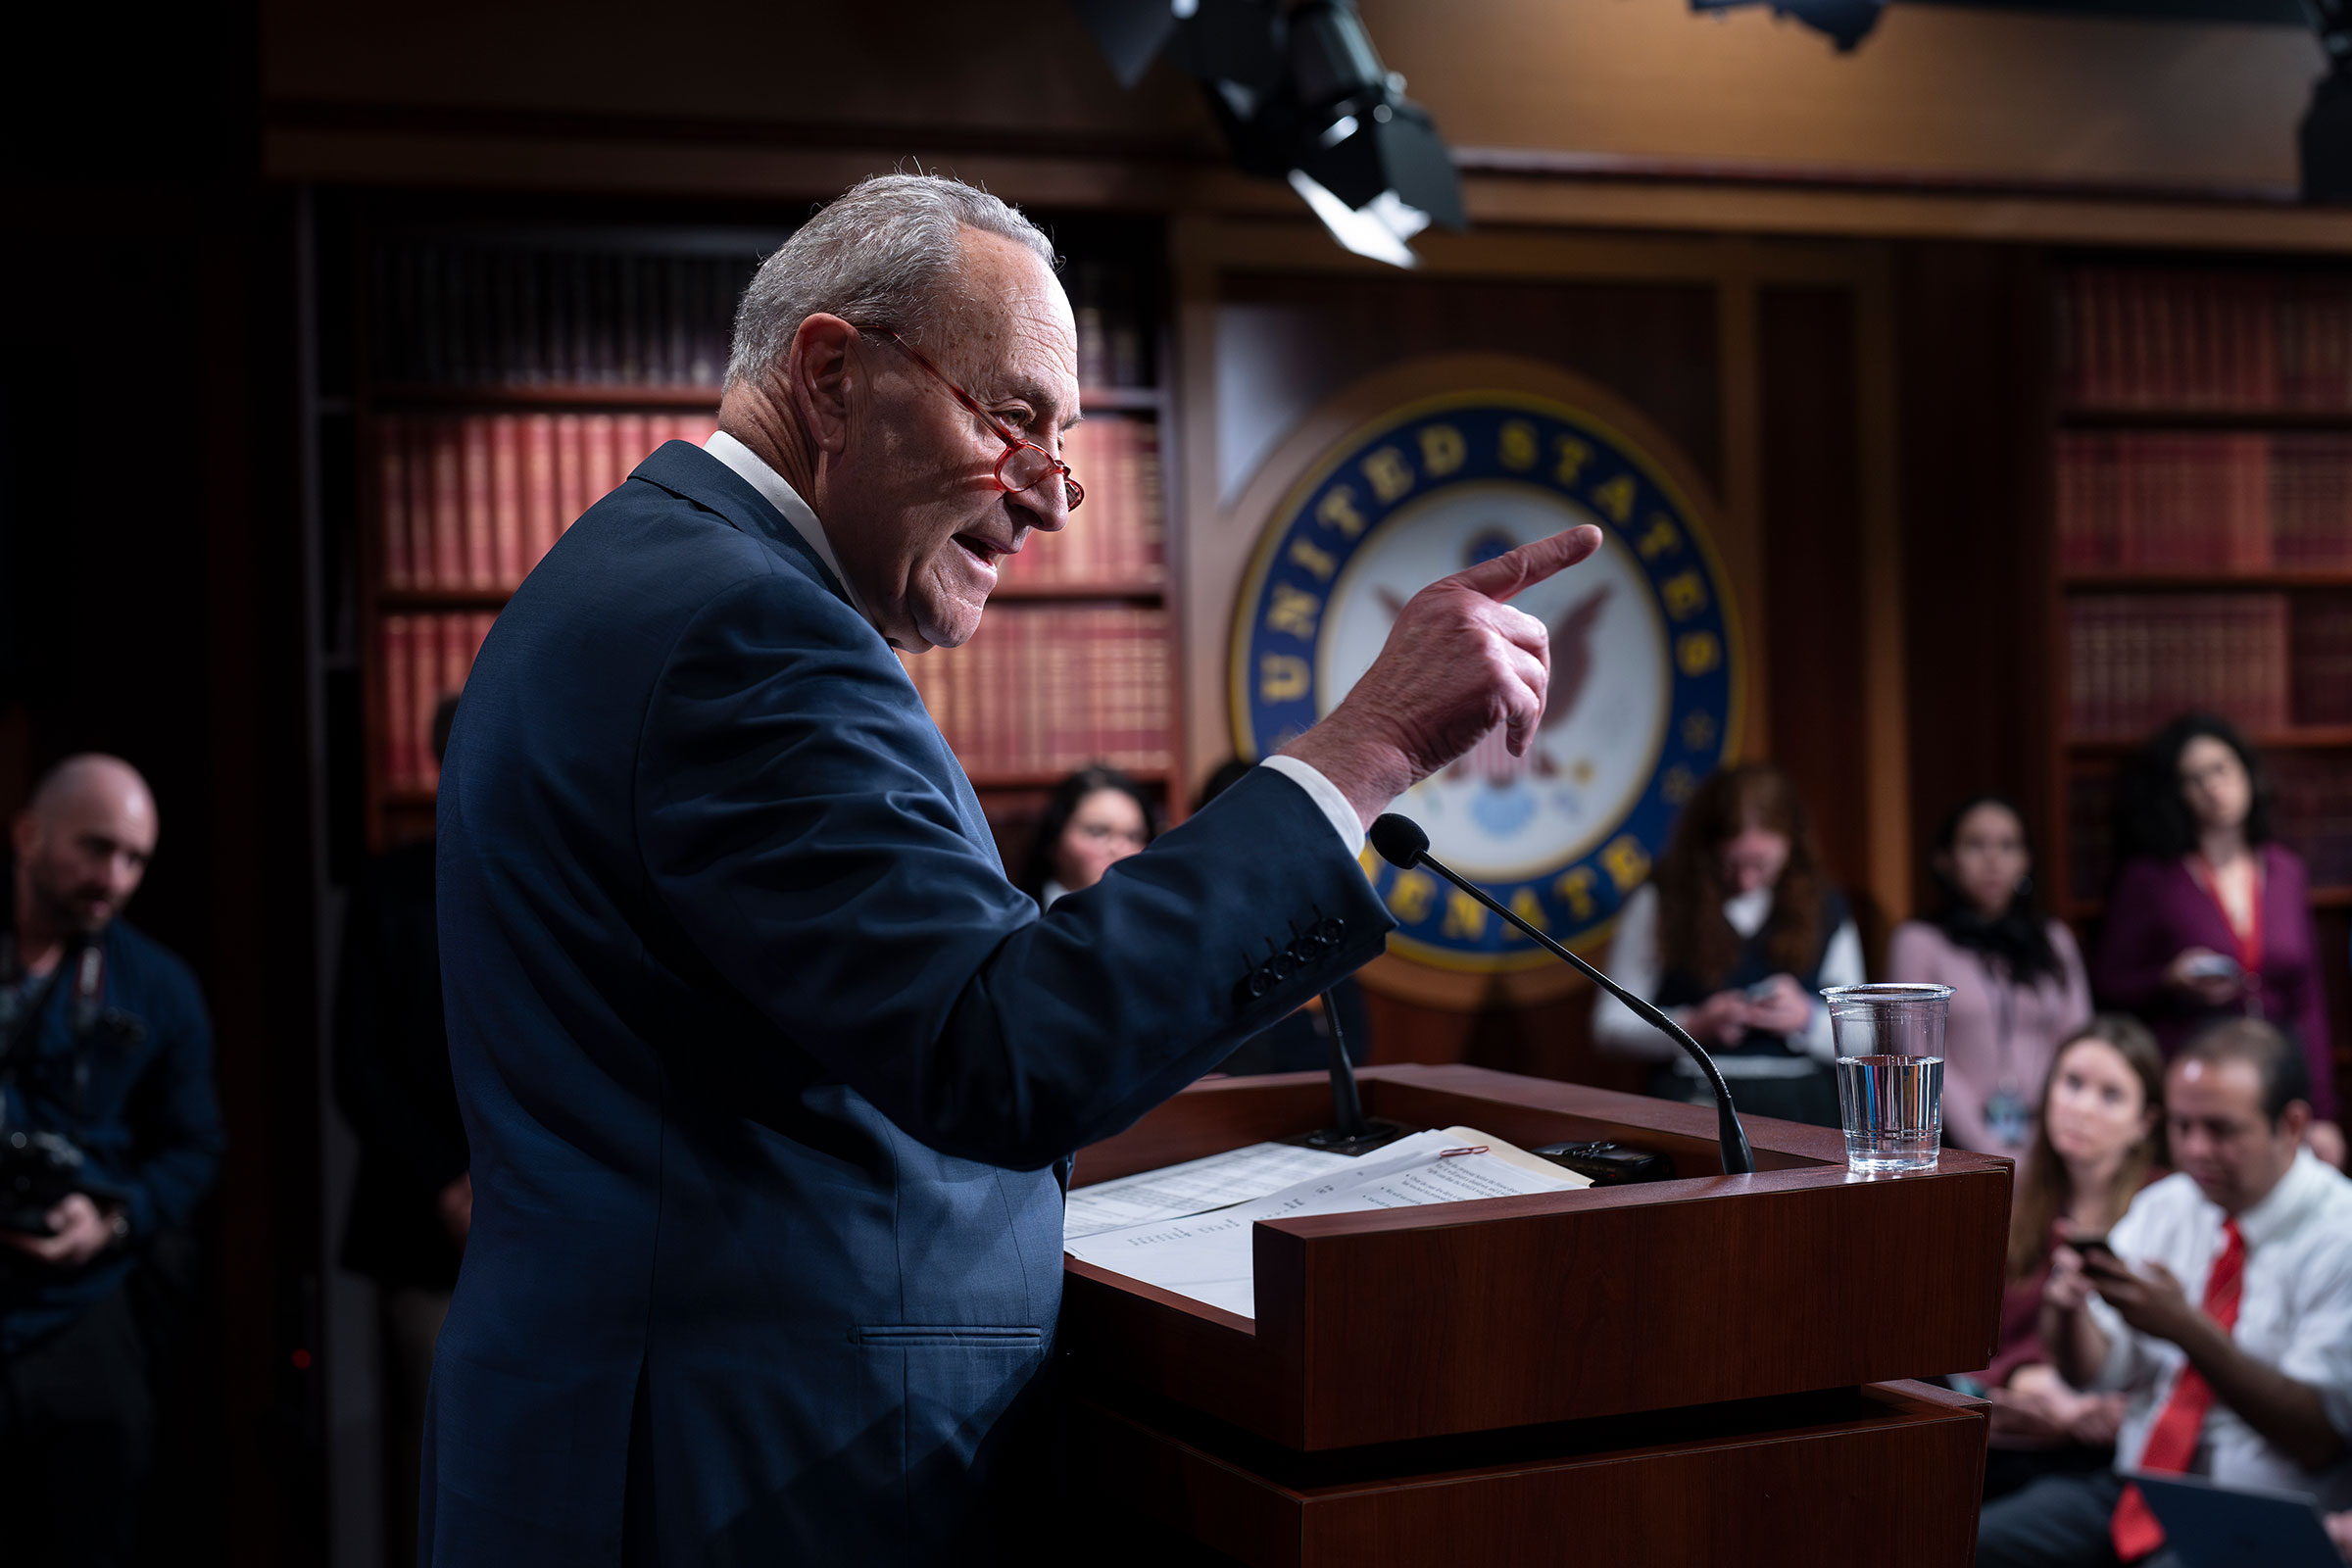 Senate Majority Leader Chuck Schumer meets with reporters before speaking to a massive rally in support of Israel, at the Capitol in Washington, DC, on Tuesday.